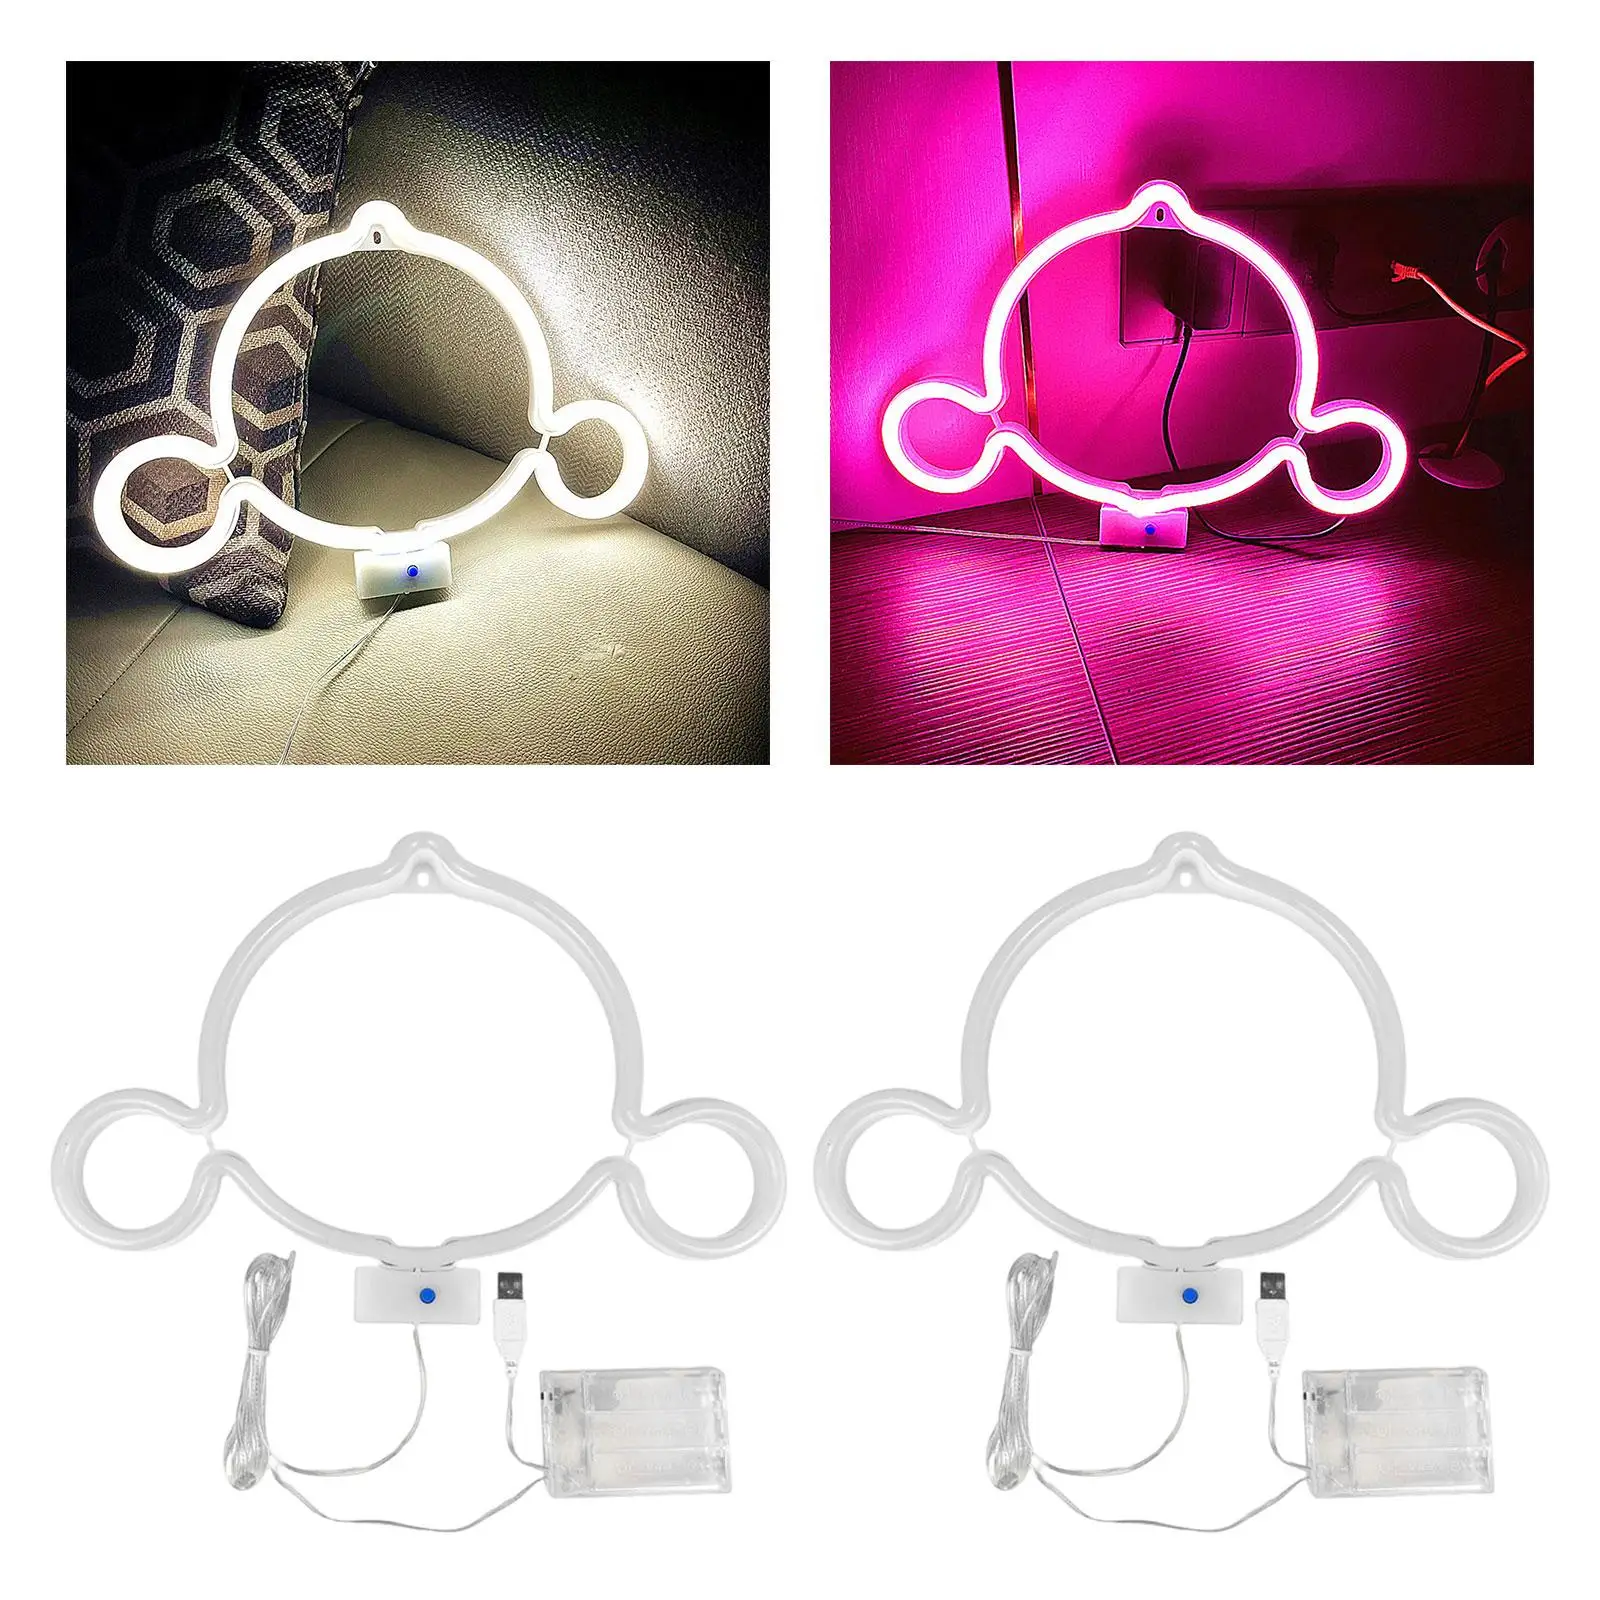 Monkey Neon Sign Light Elf Glowing USB Present Desk Lamp Decorative Lights for Wedding Holiday Decoration Photo Prop Party Favor